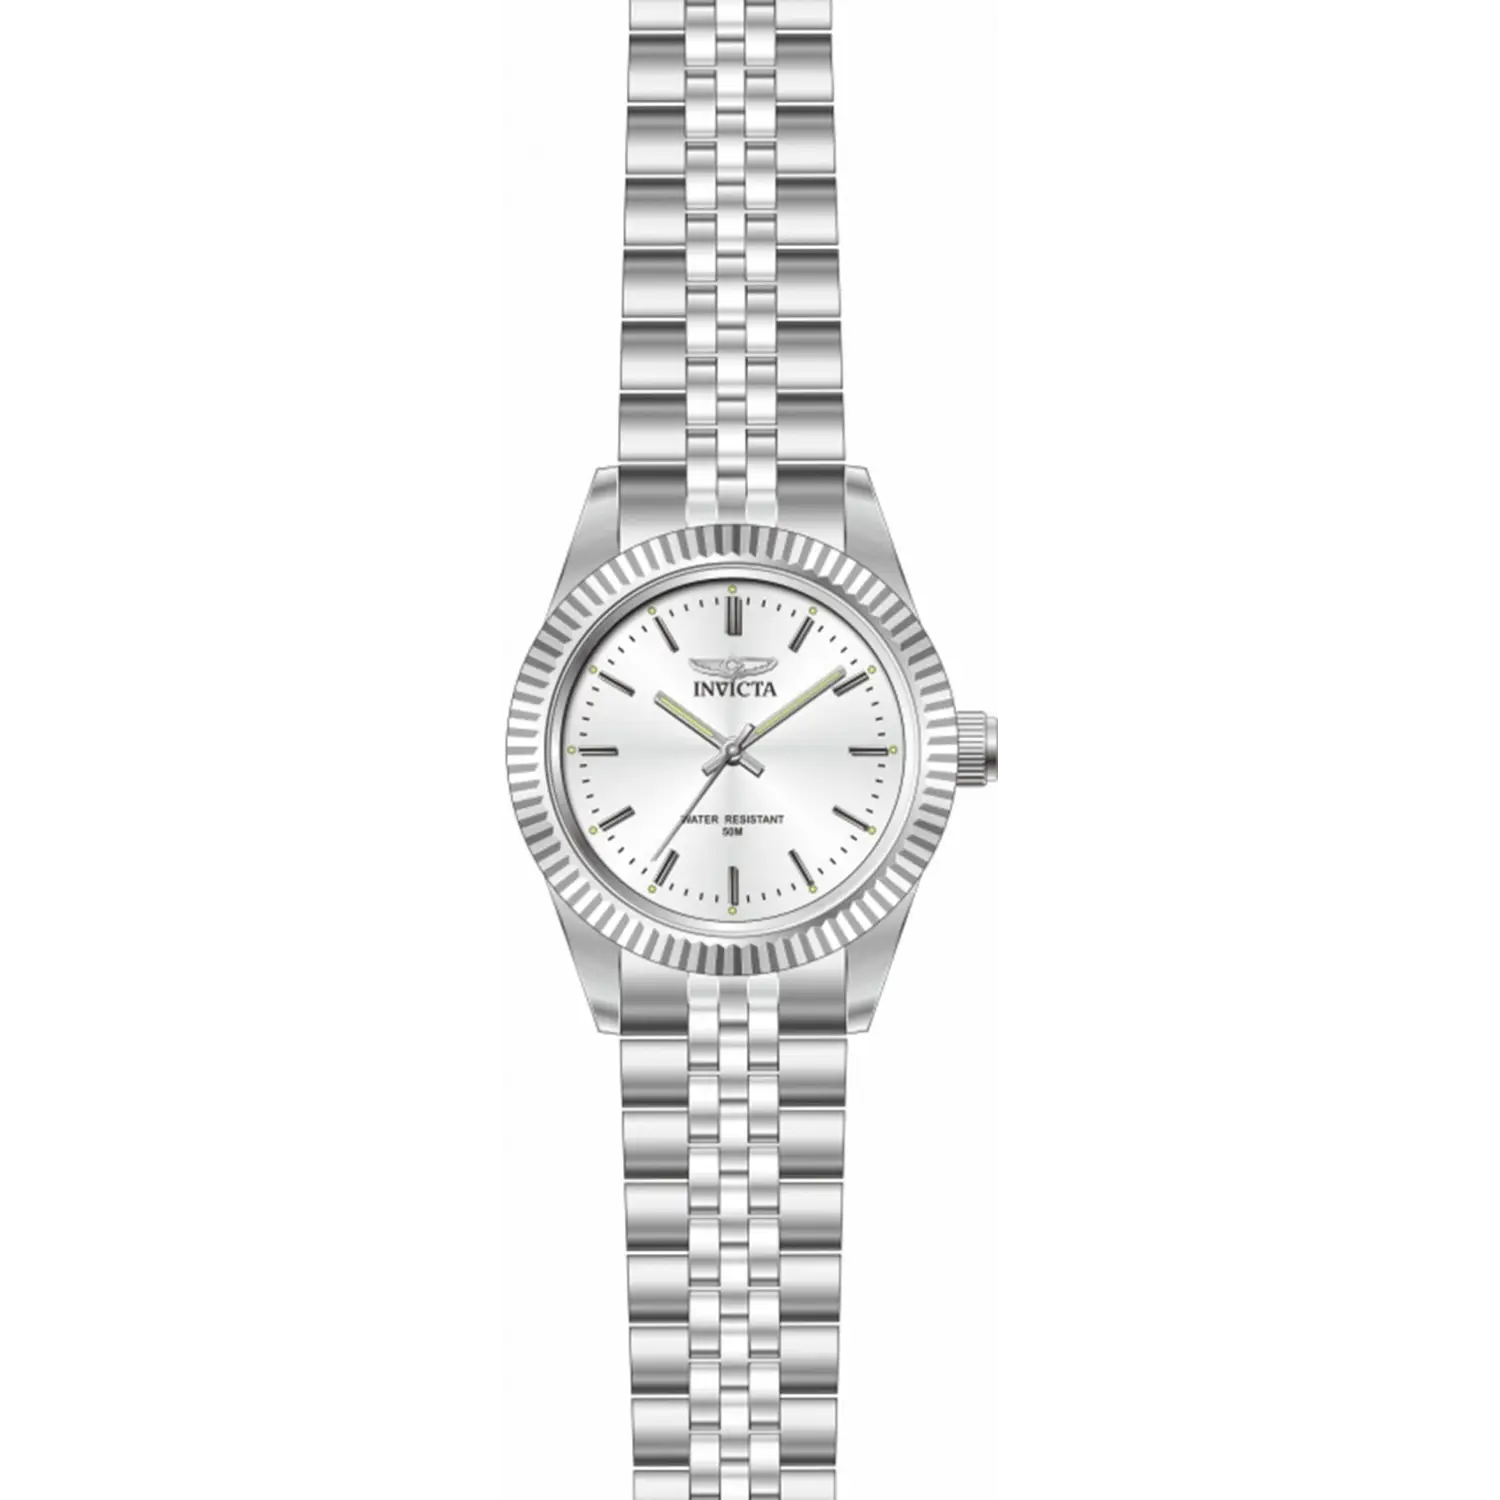 Invicta Women’s Specialty Silver Tone Dial Stainless Steel